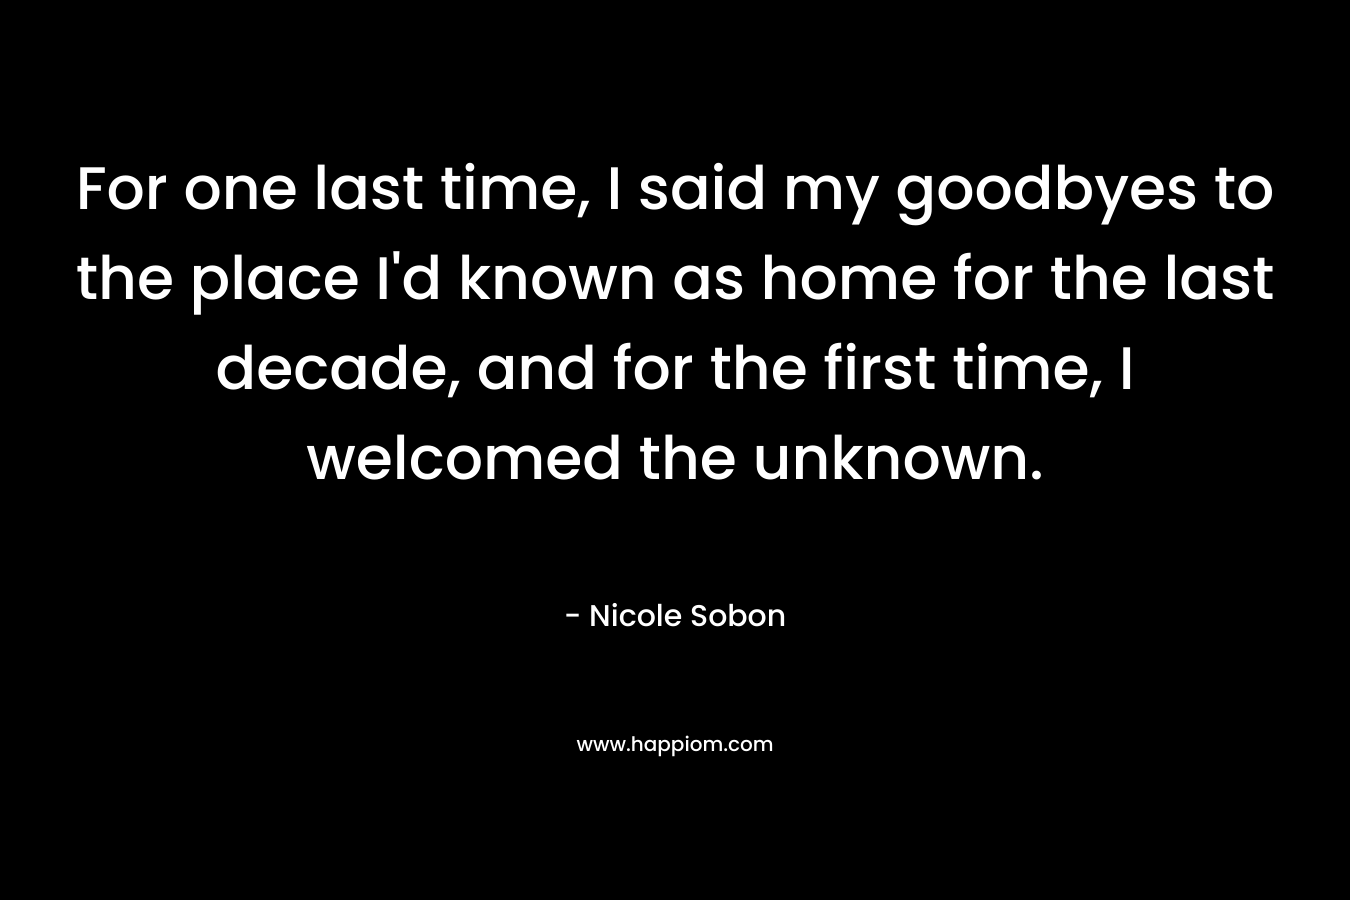 For one last time, I said my goodbyes to the place I'd known as home for the last decade, and for the first time, I welcomed the unknown.